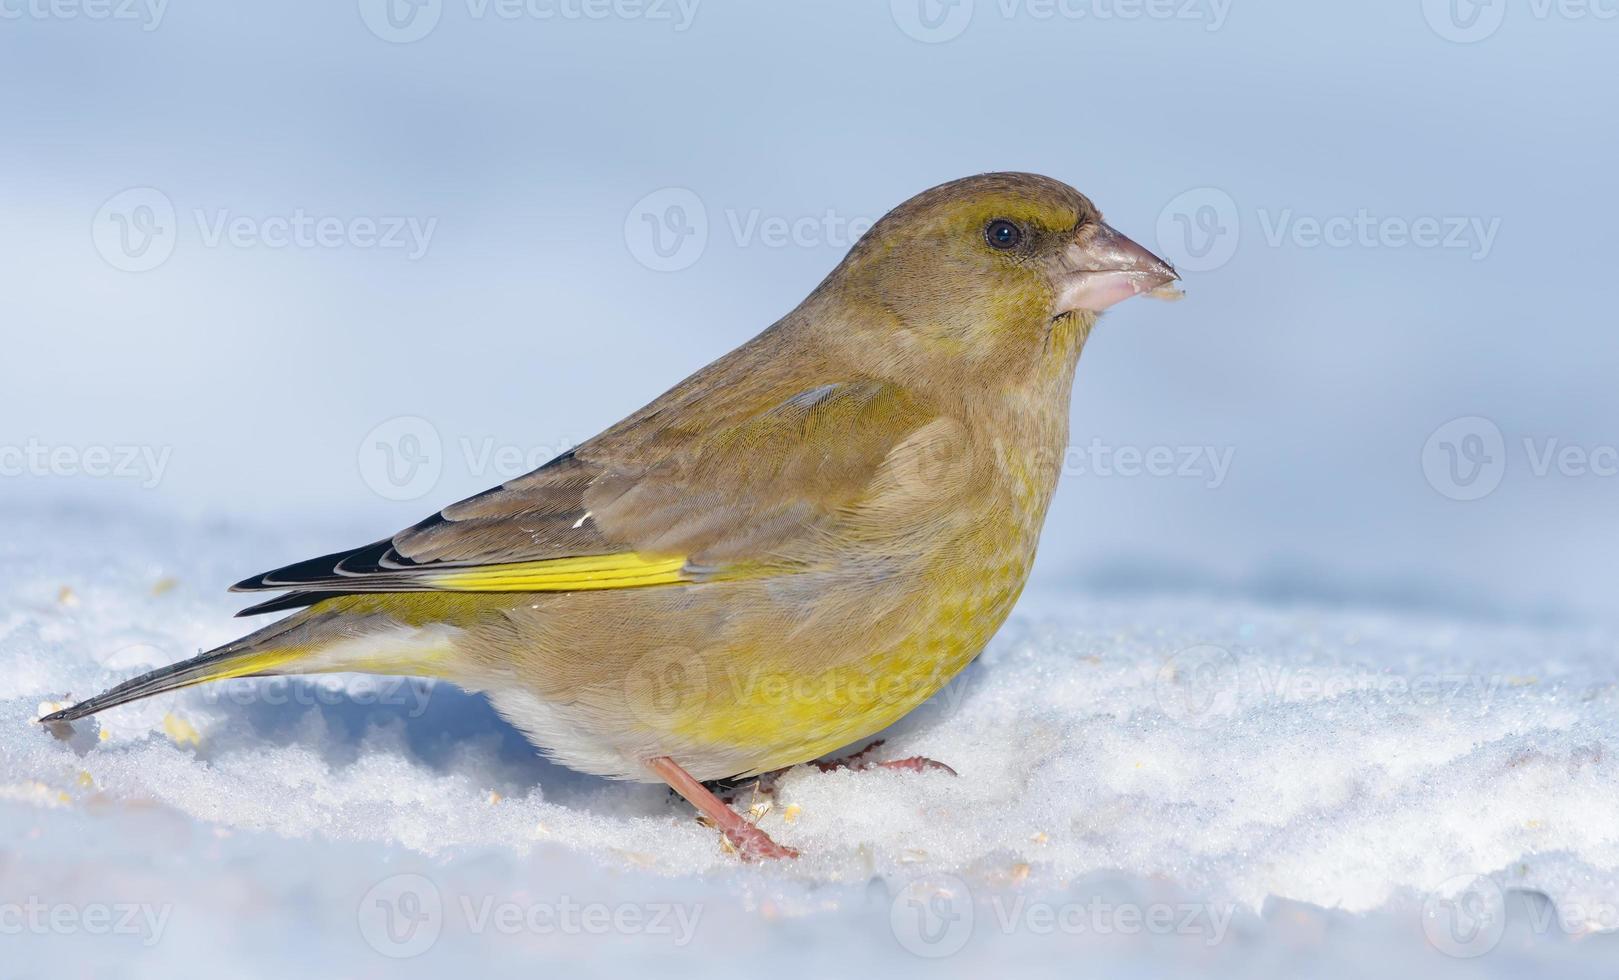 Vivid Male European Greenfinch - Chloris chloris - stands in snow in bright sunny winter day photo